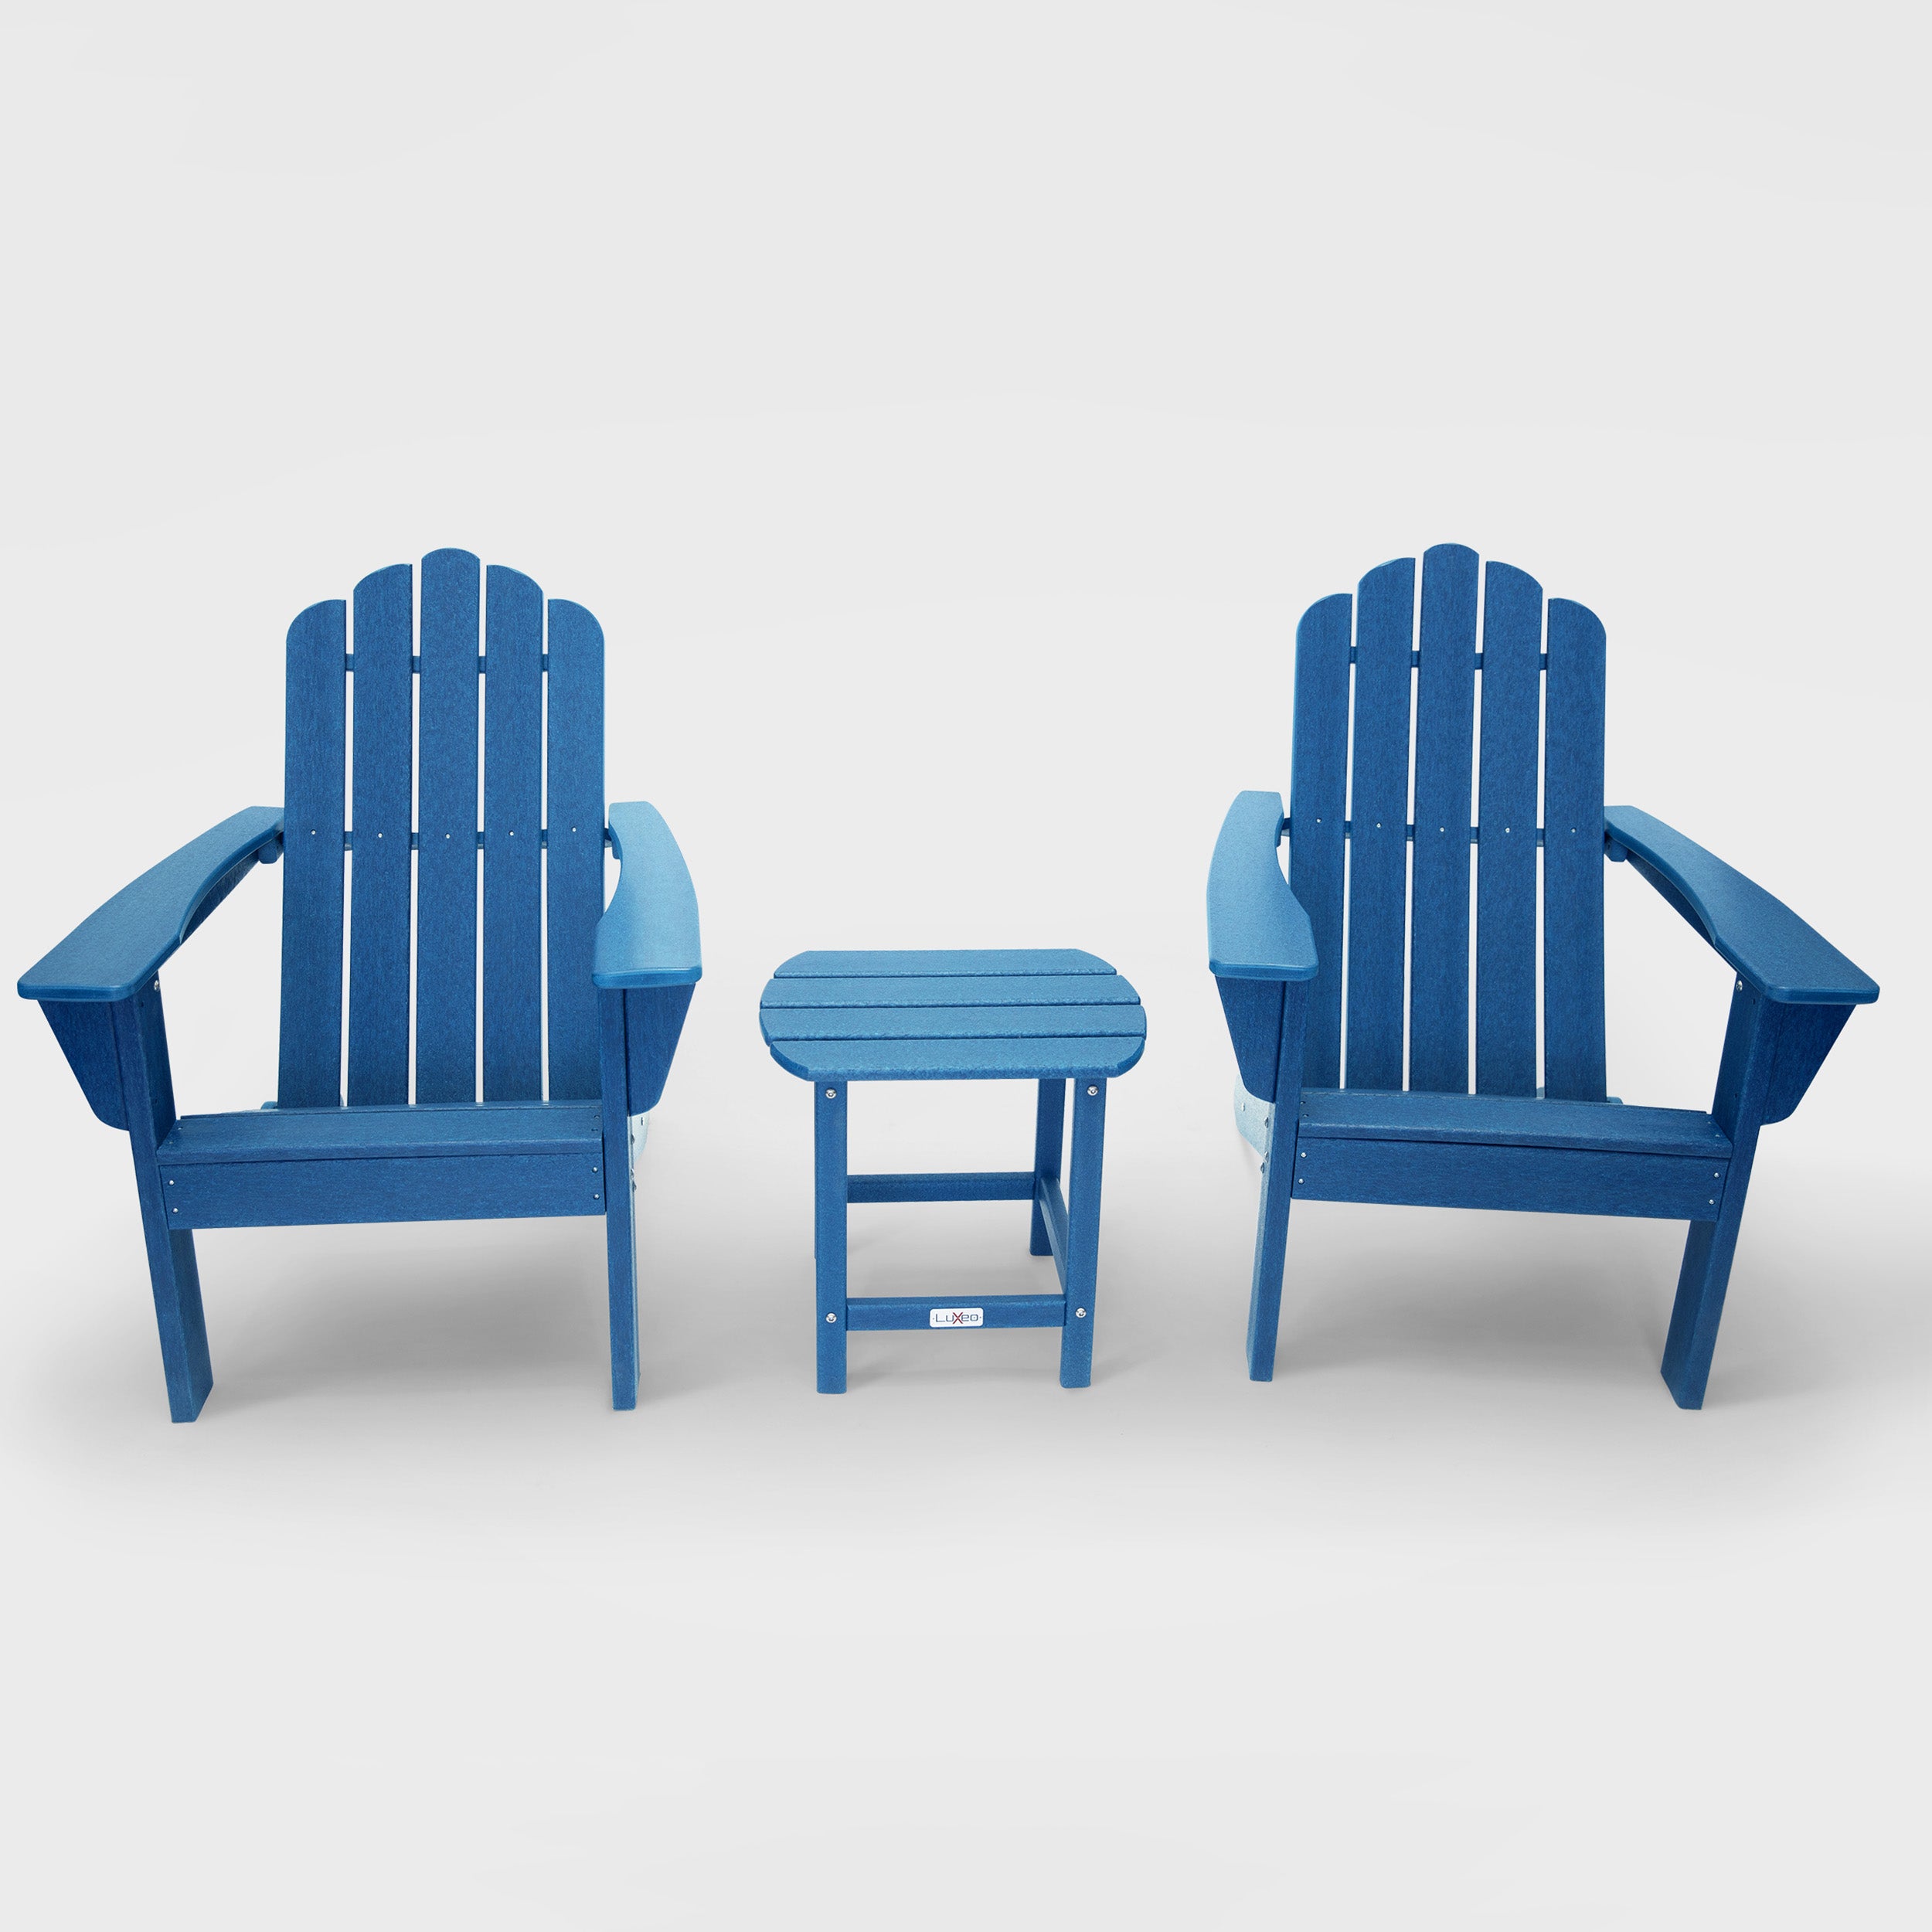 LuXeo Marina HDPE Recycled Plastic Outdoor Patio Adirondack Chair and Table Set (3-Piece)